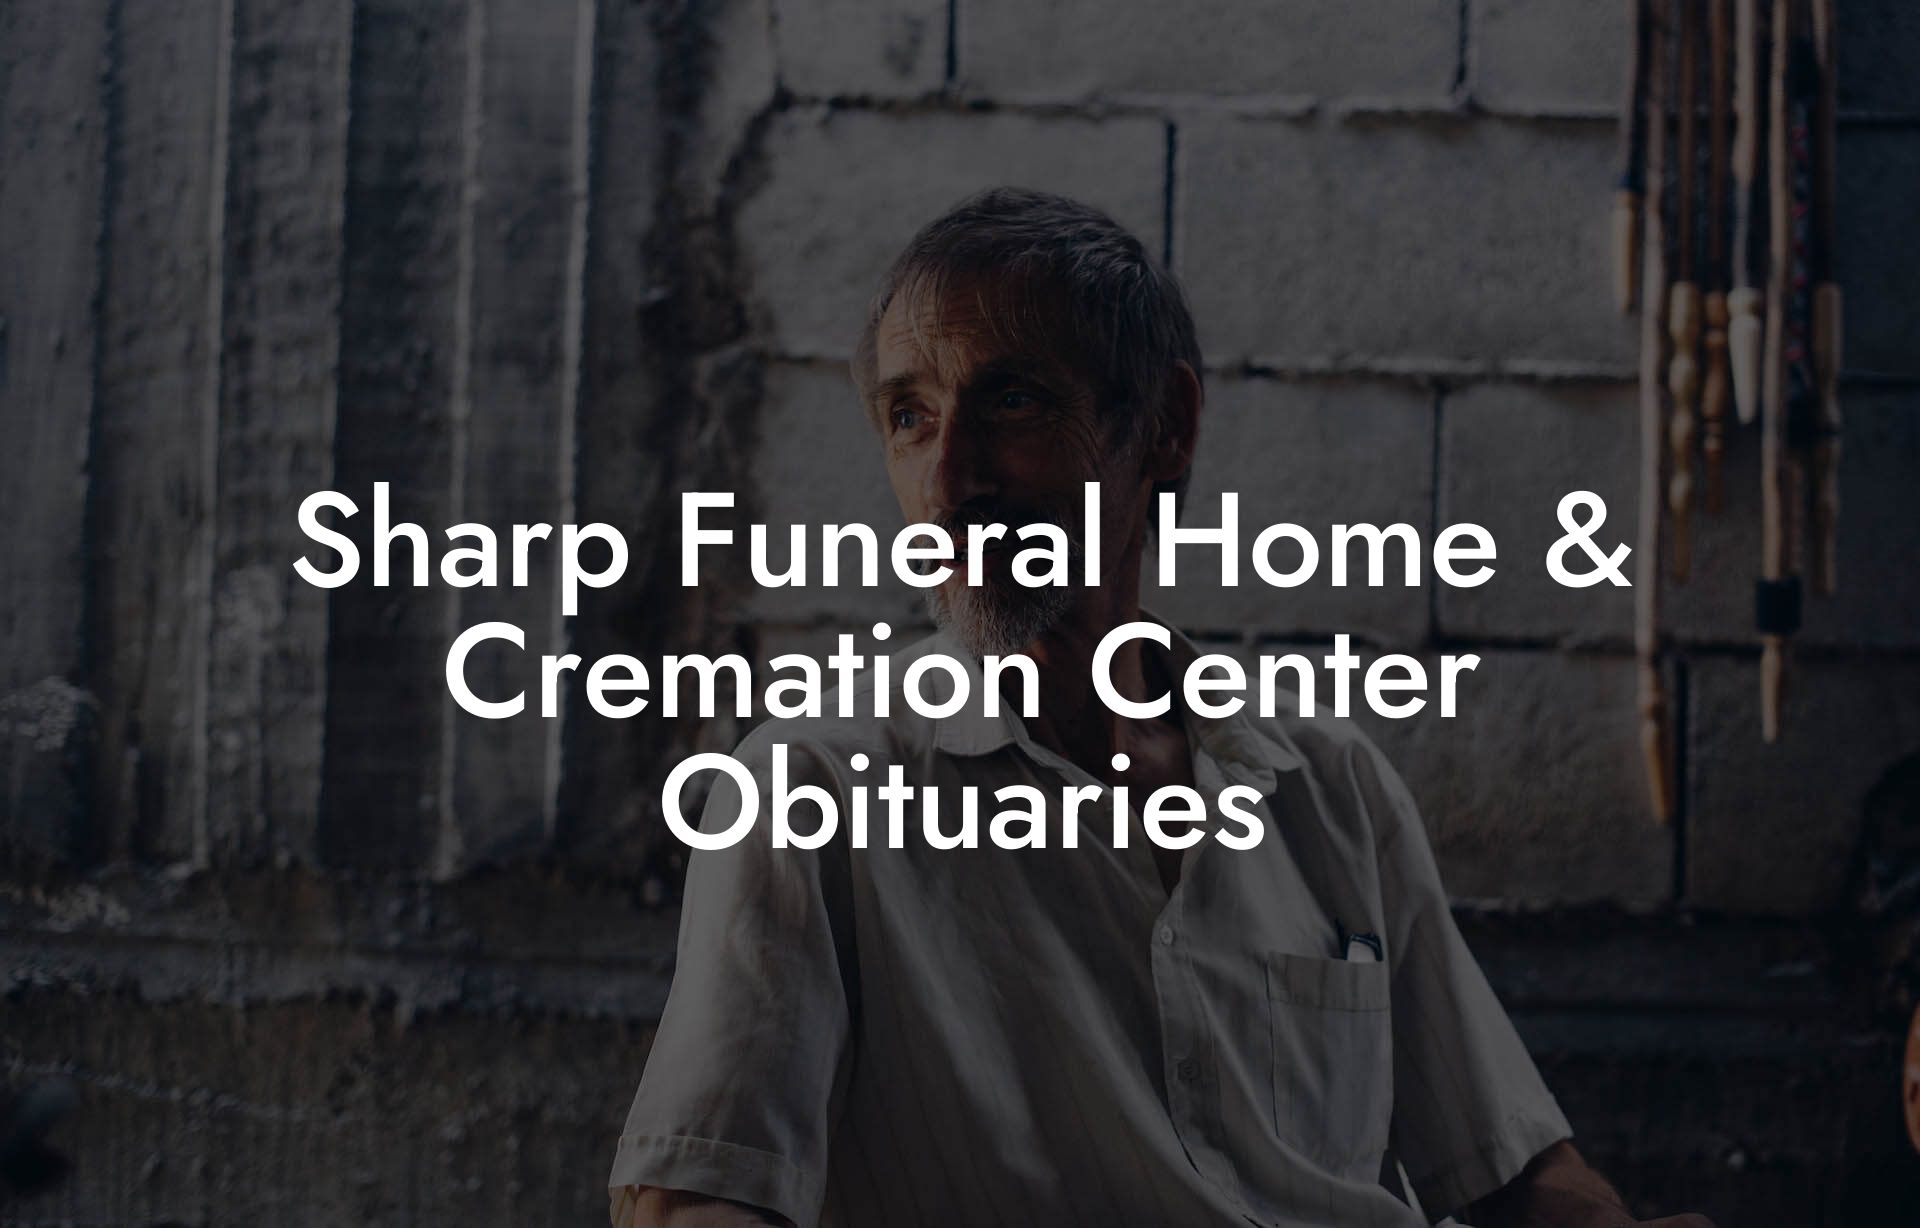 Sharp Funeral Home & Cremation Center Obituaries